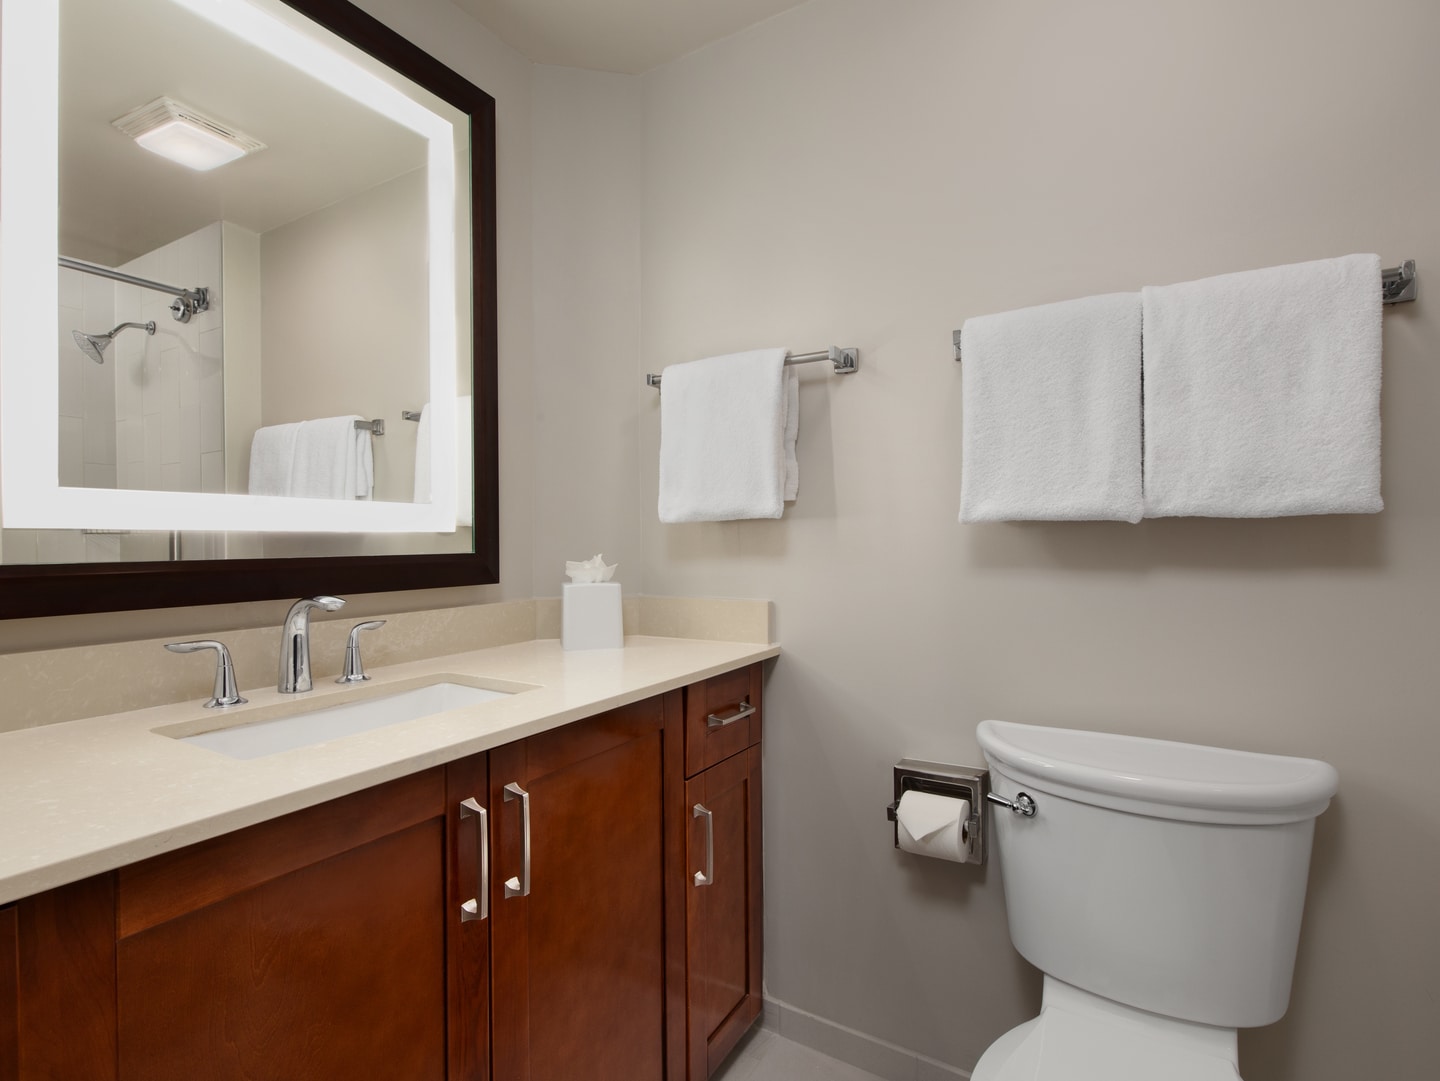 Marriott's BeachPlace Towers Villa Guest Bathroom. Marriott's BeachPlace Towers is located in Fort Lauderdale, Florida United States.